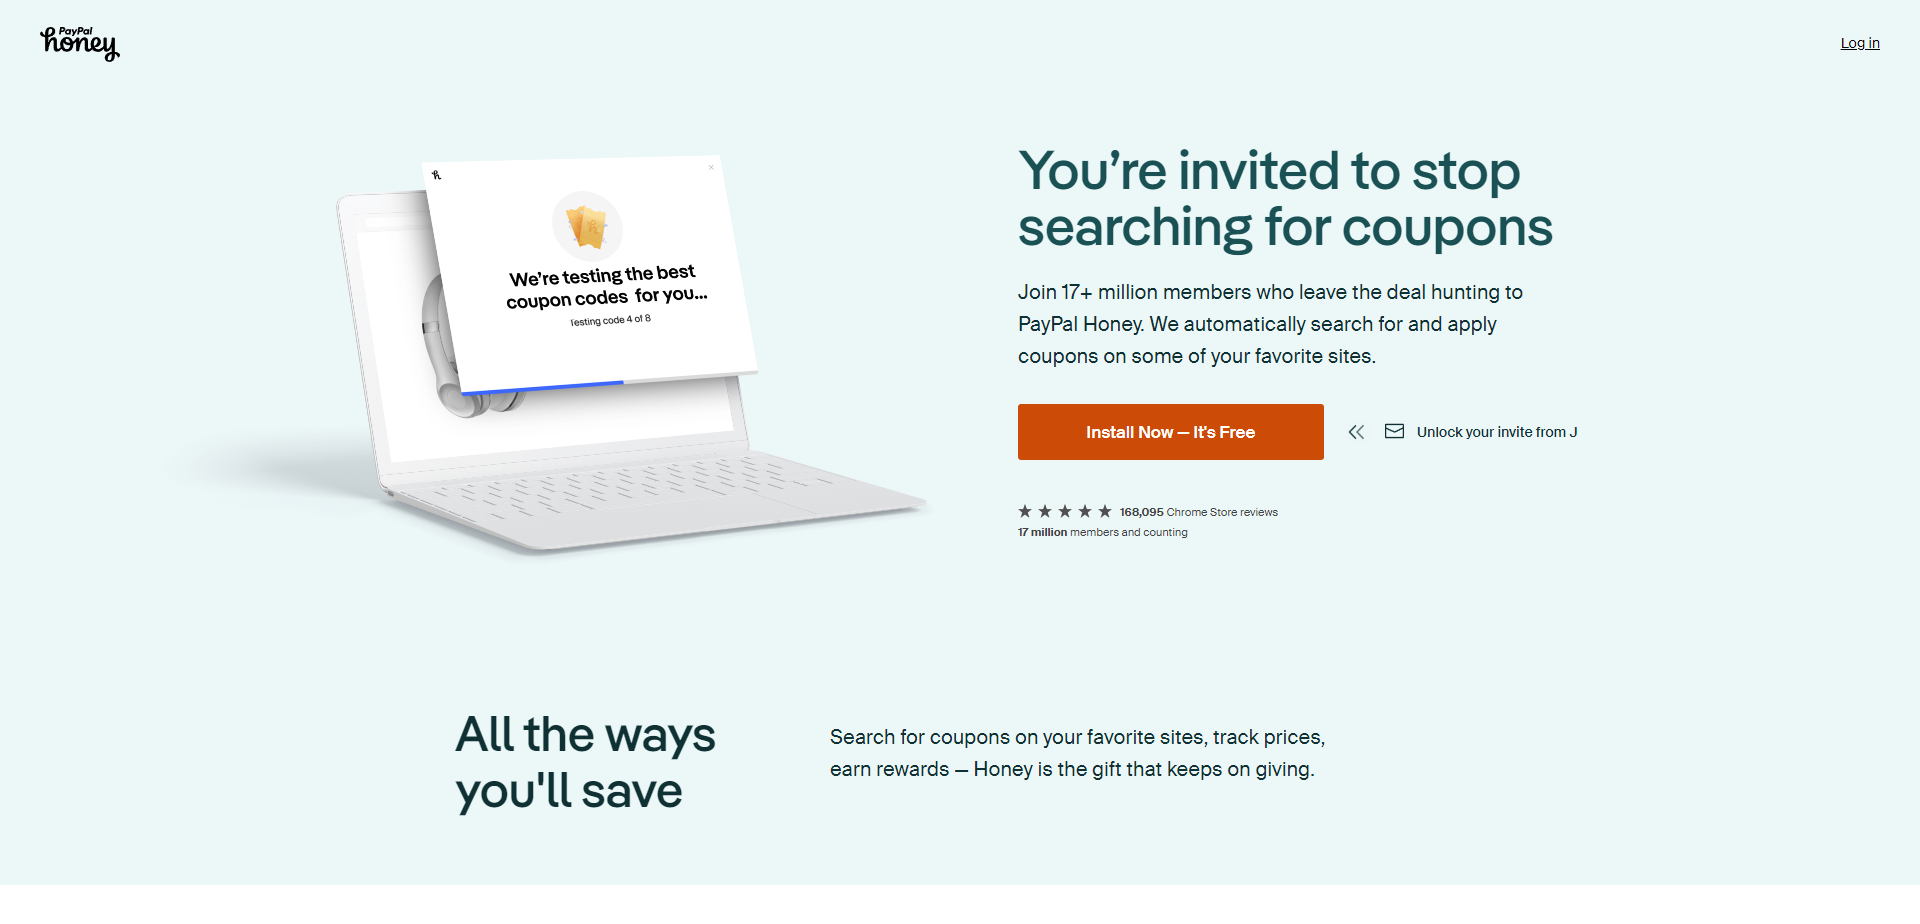 Referral Landing Page for Honey